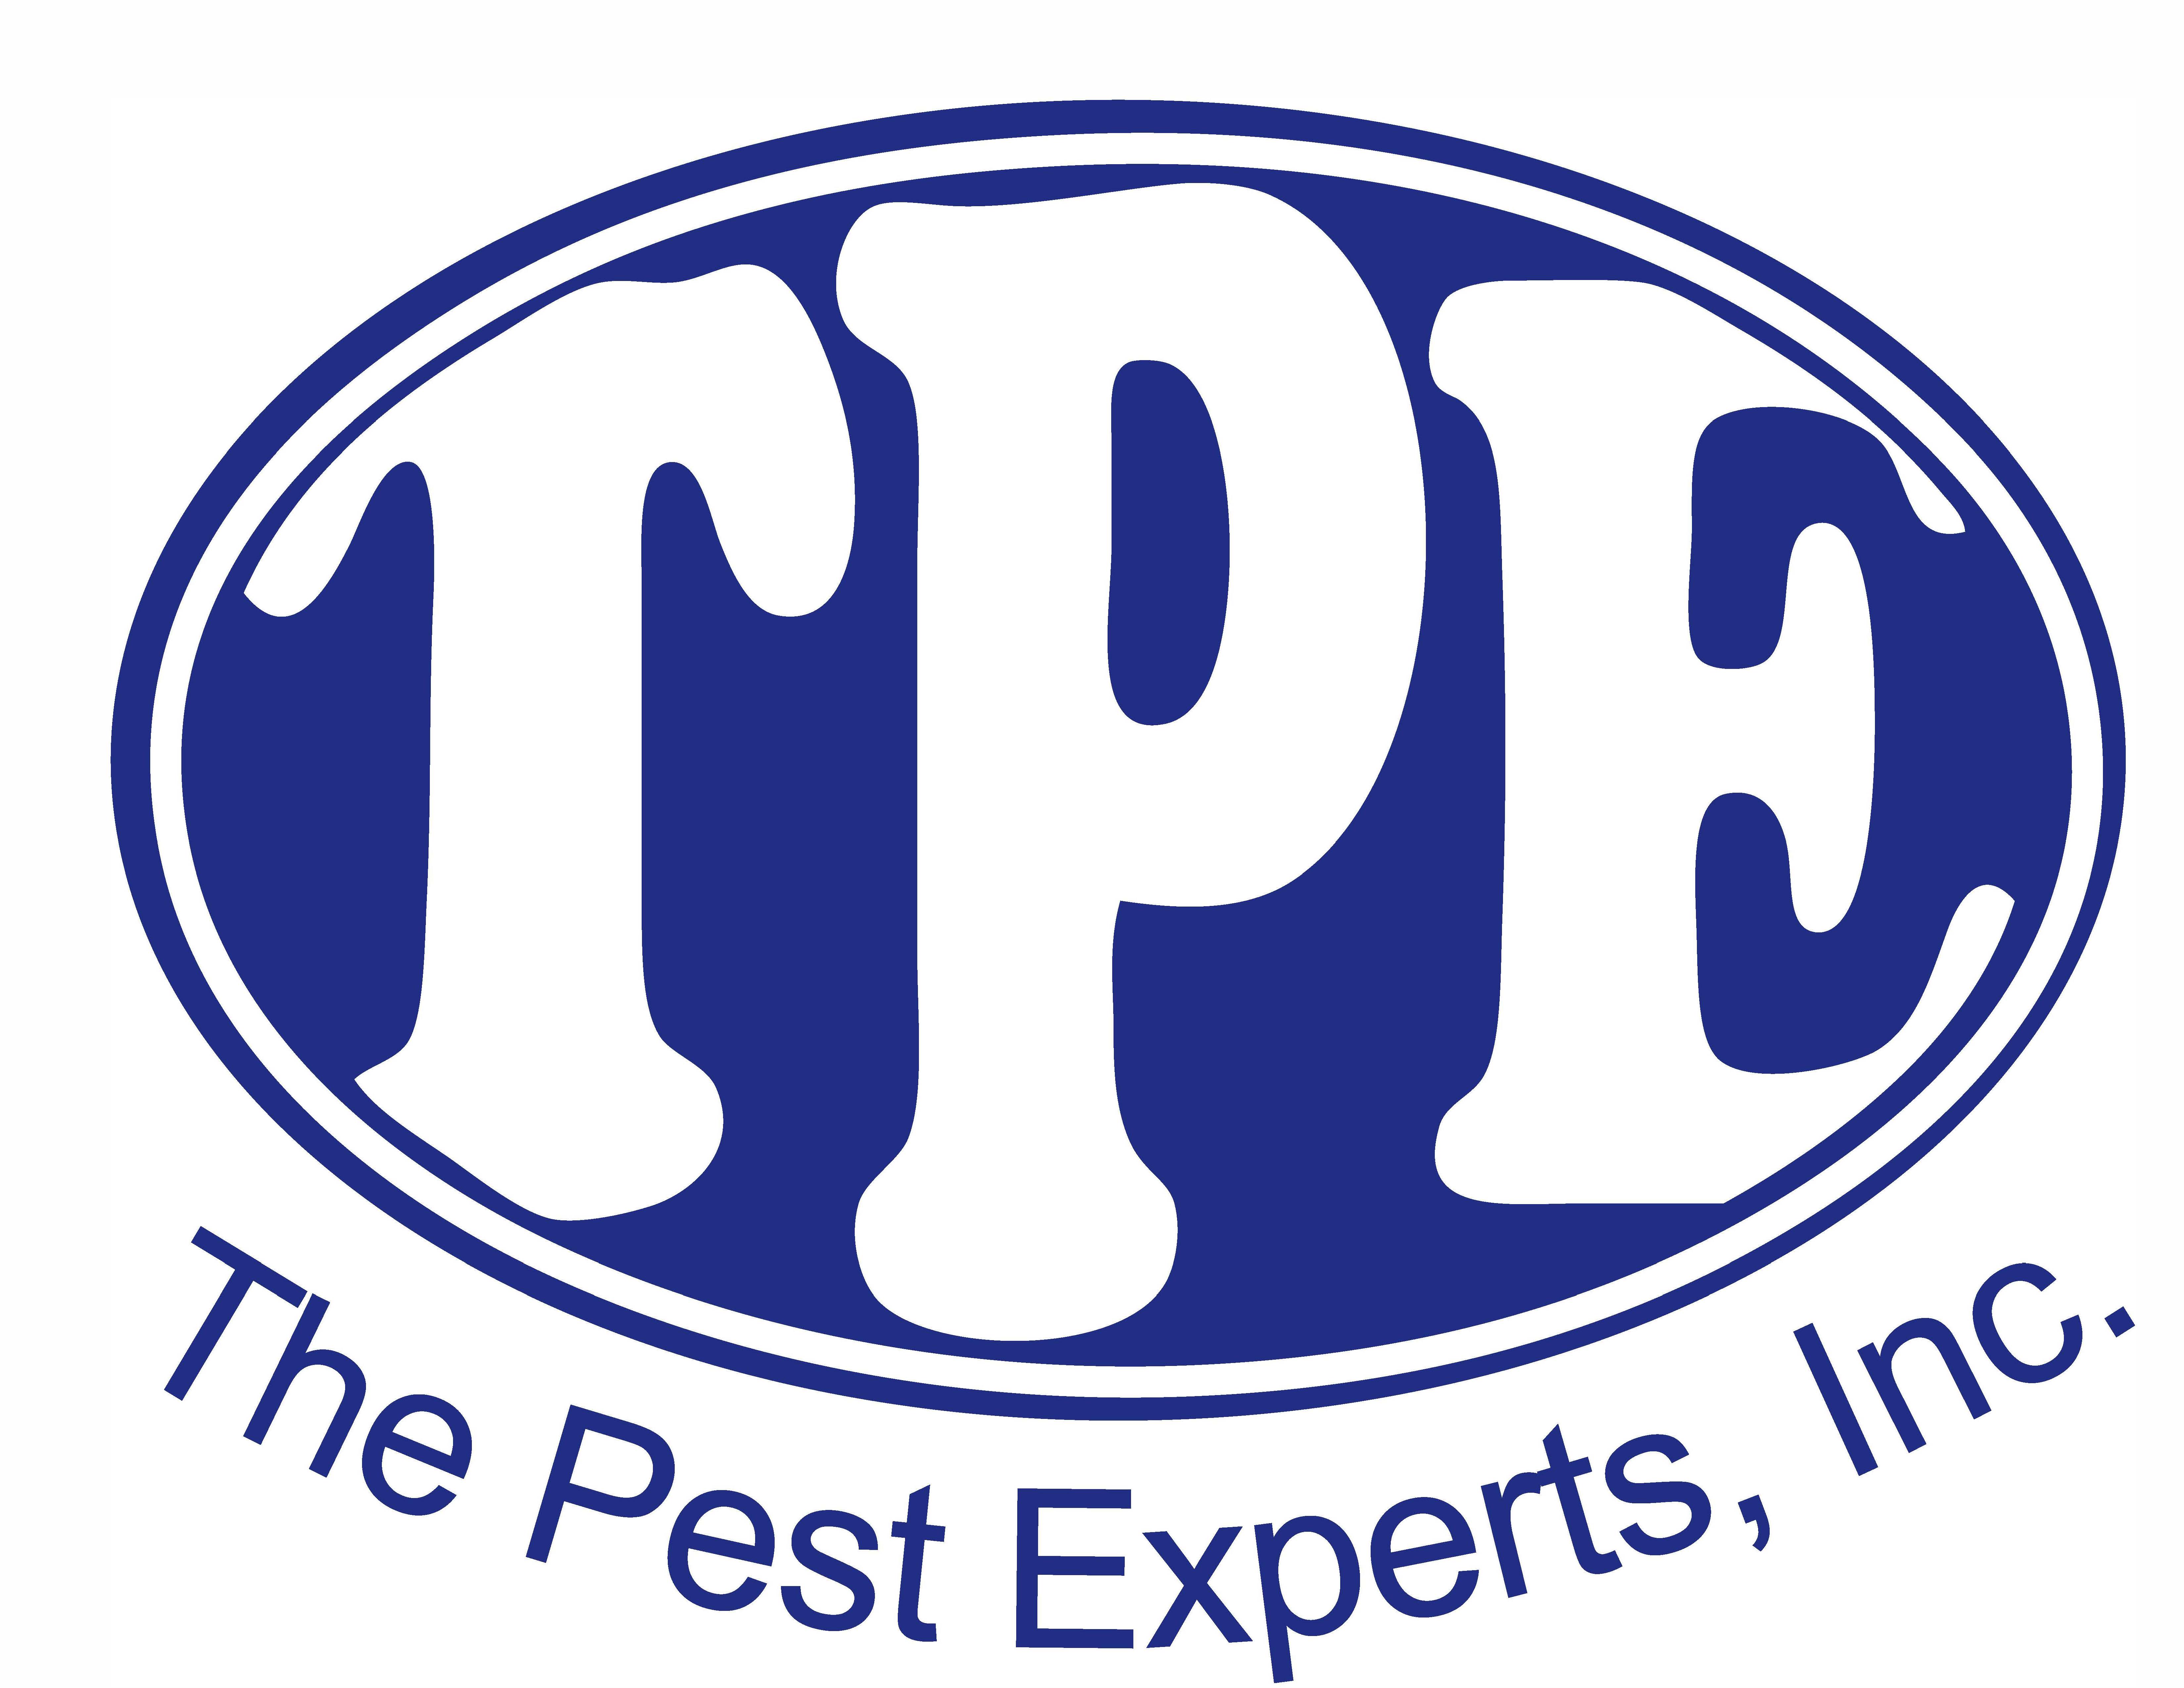 The Pest Experts Logo